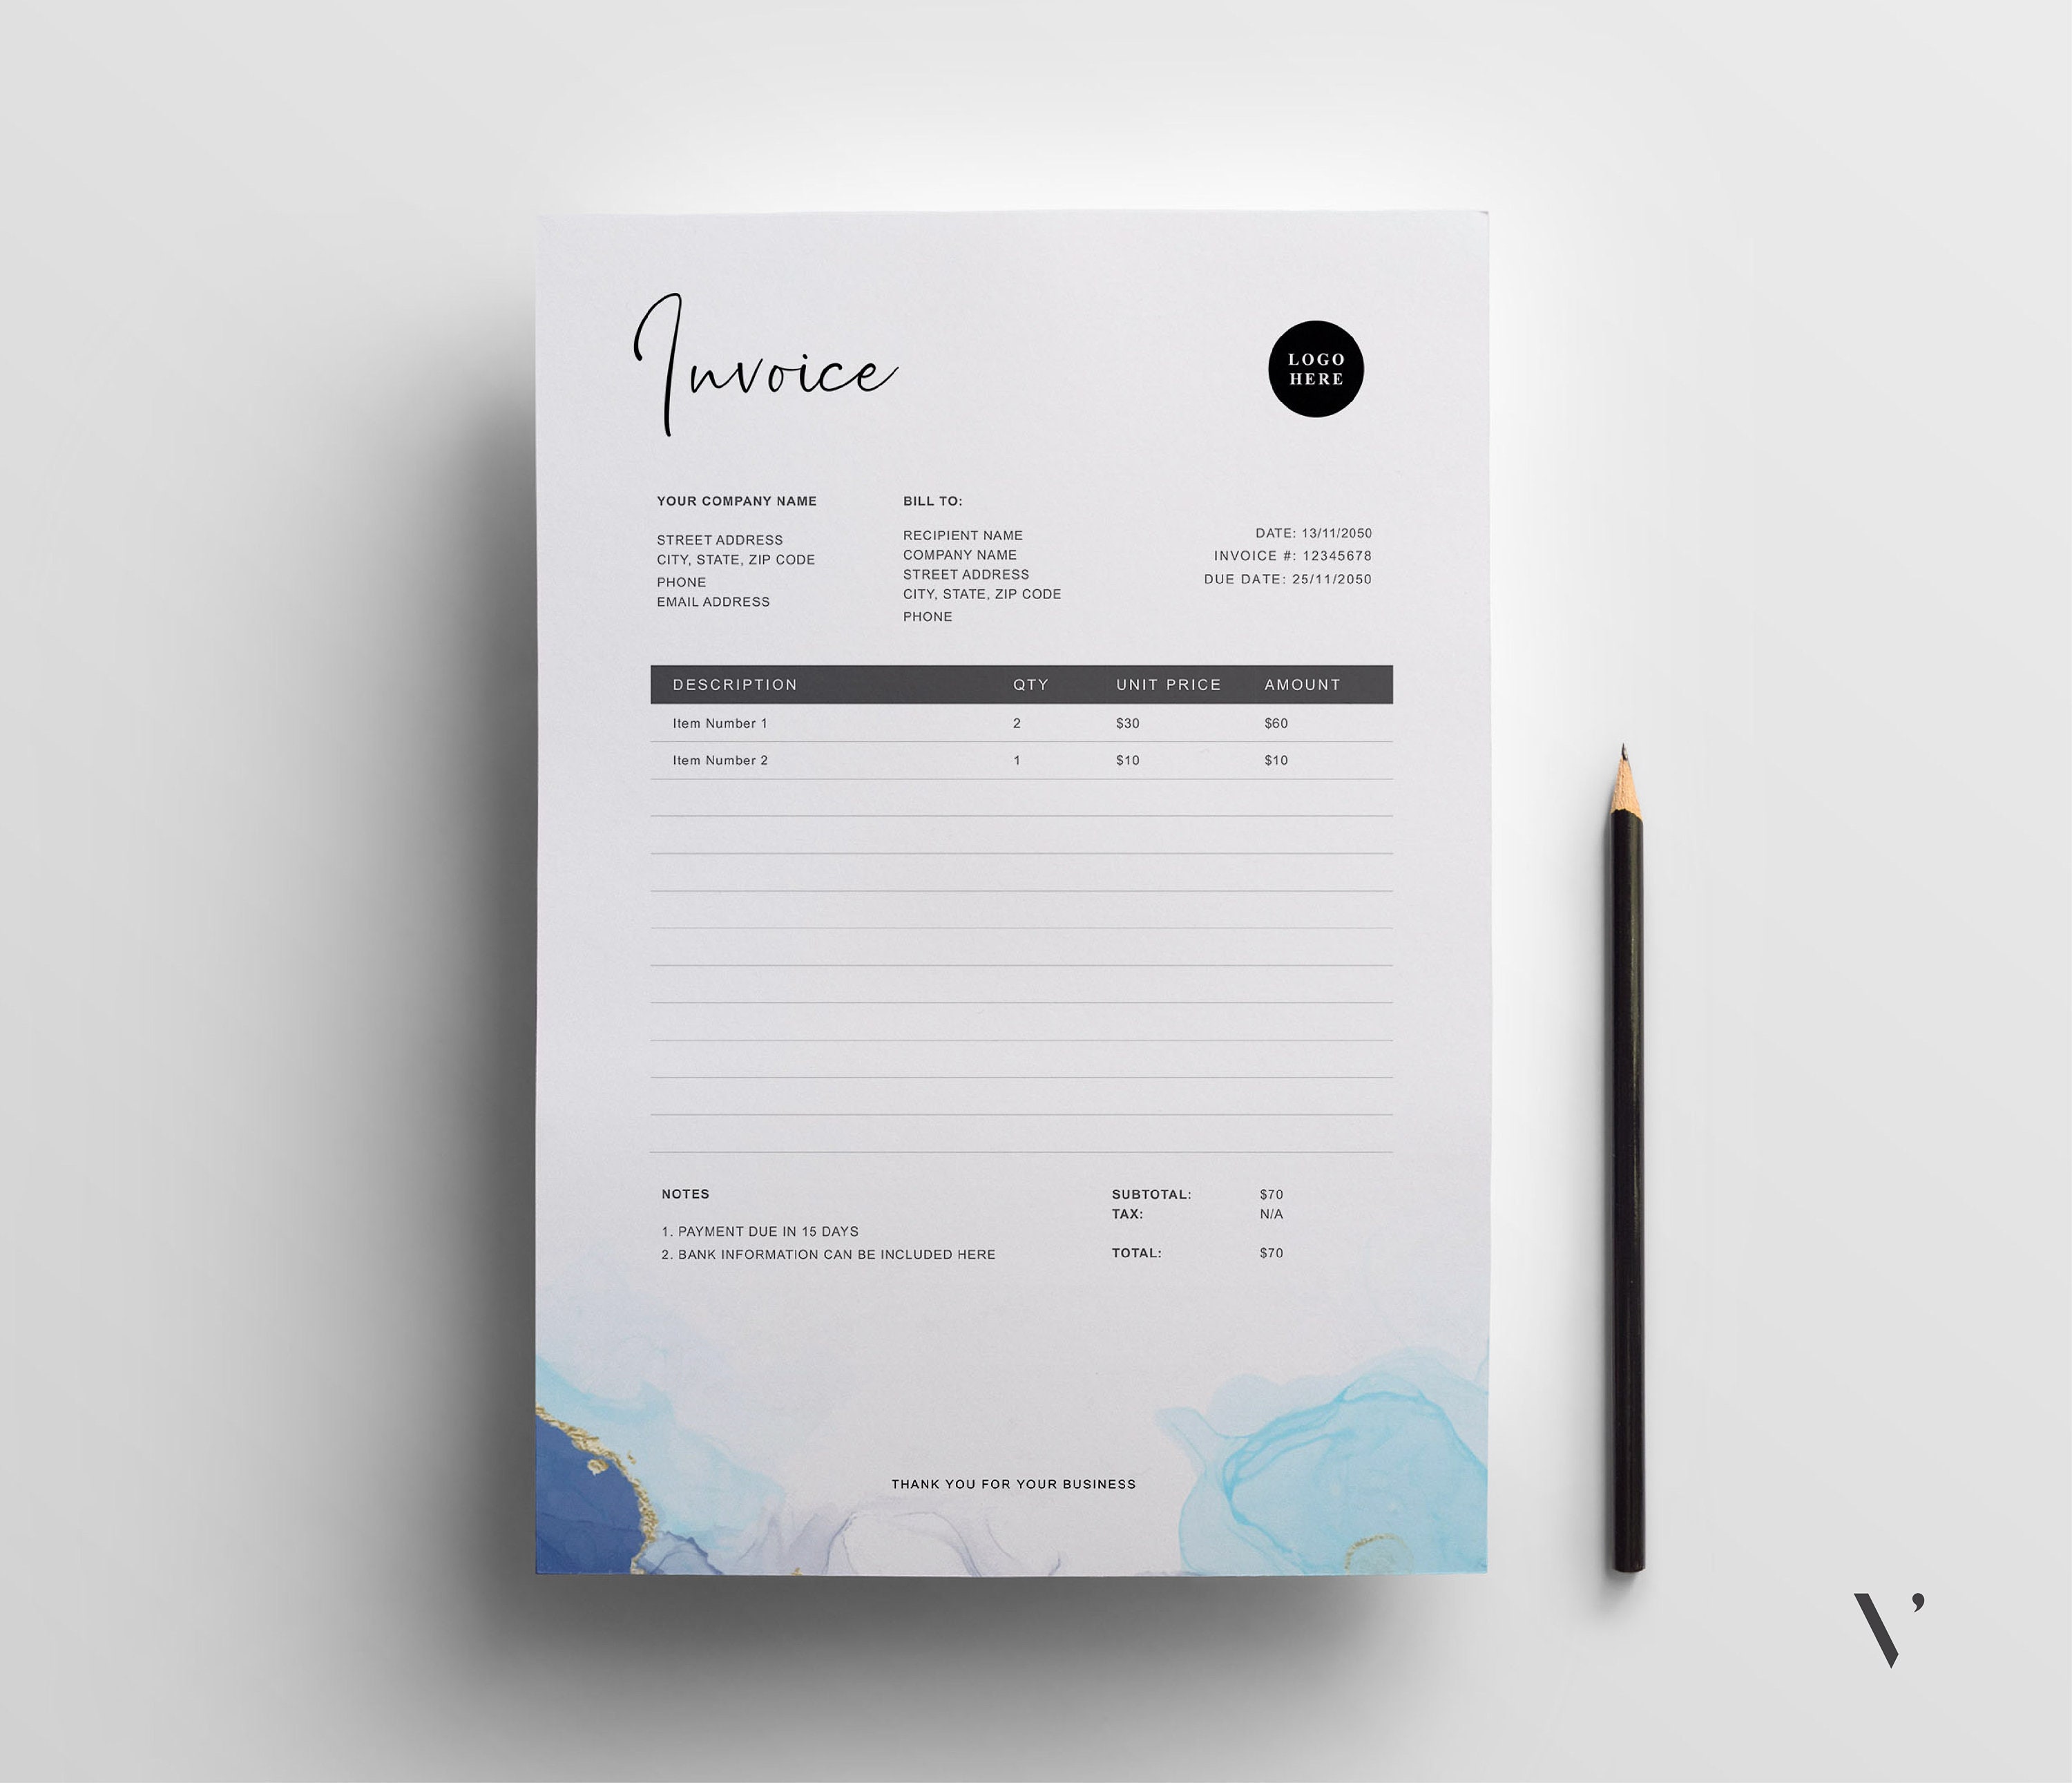 invoice-template-word-printable-invoice-custom-order-forms-etsy